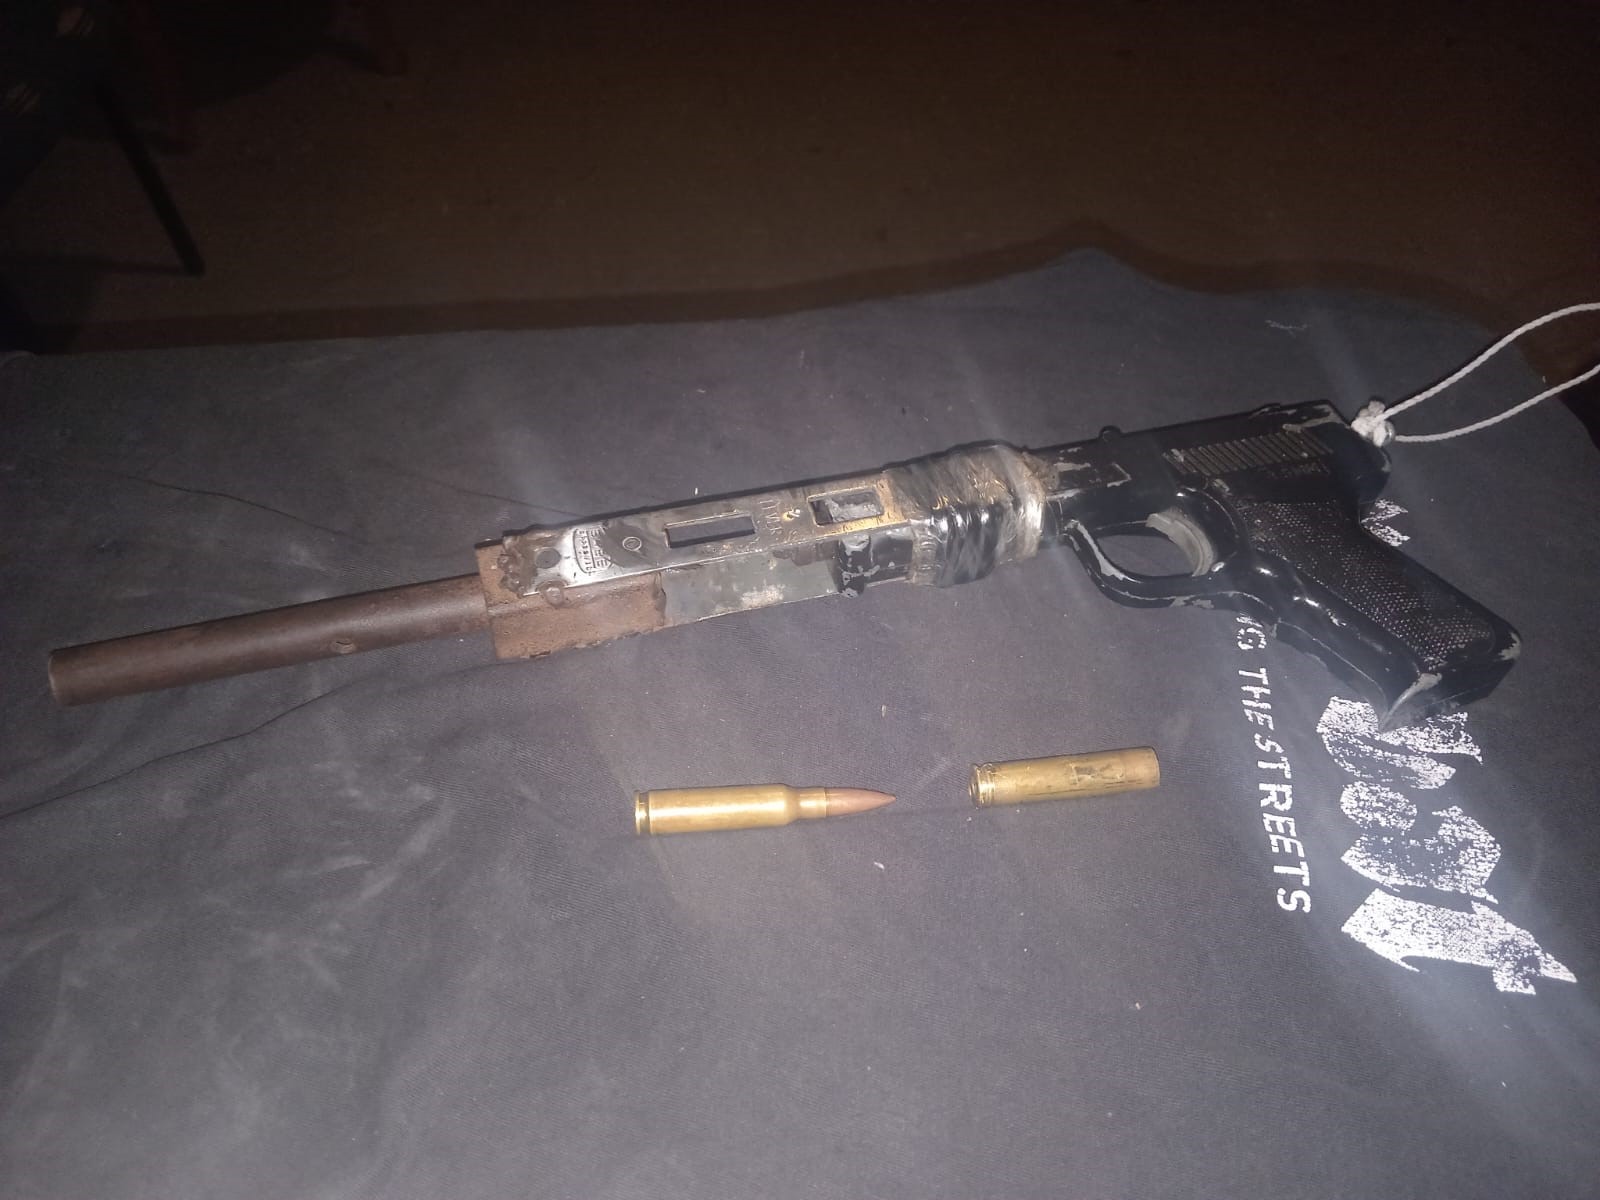 Two suspects are heading to court on charges of possession of unlicensed firearms and ammunition